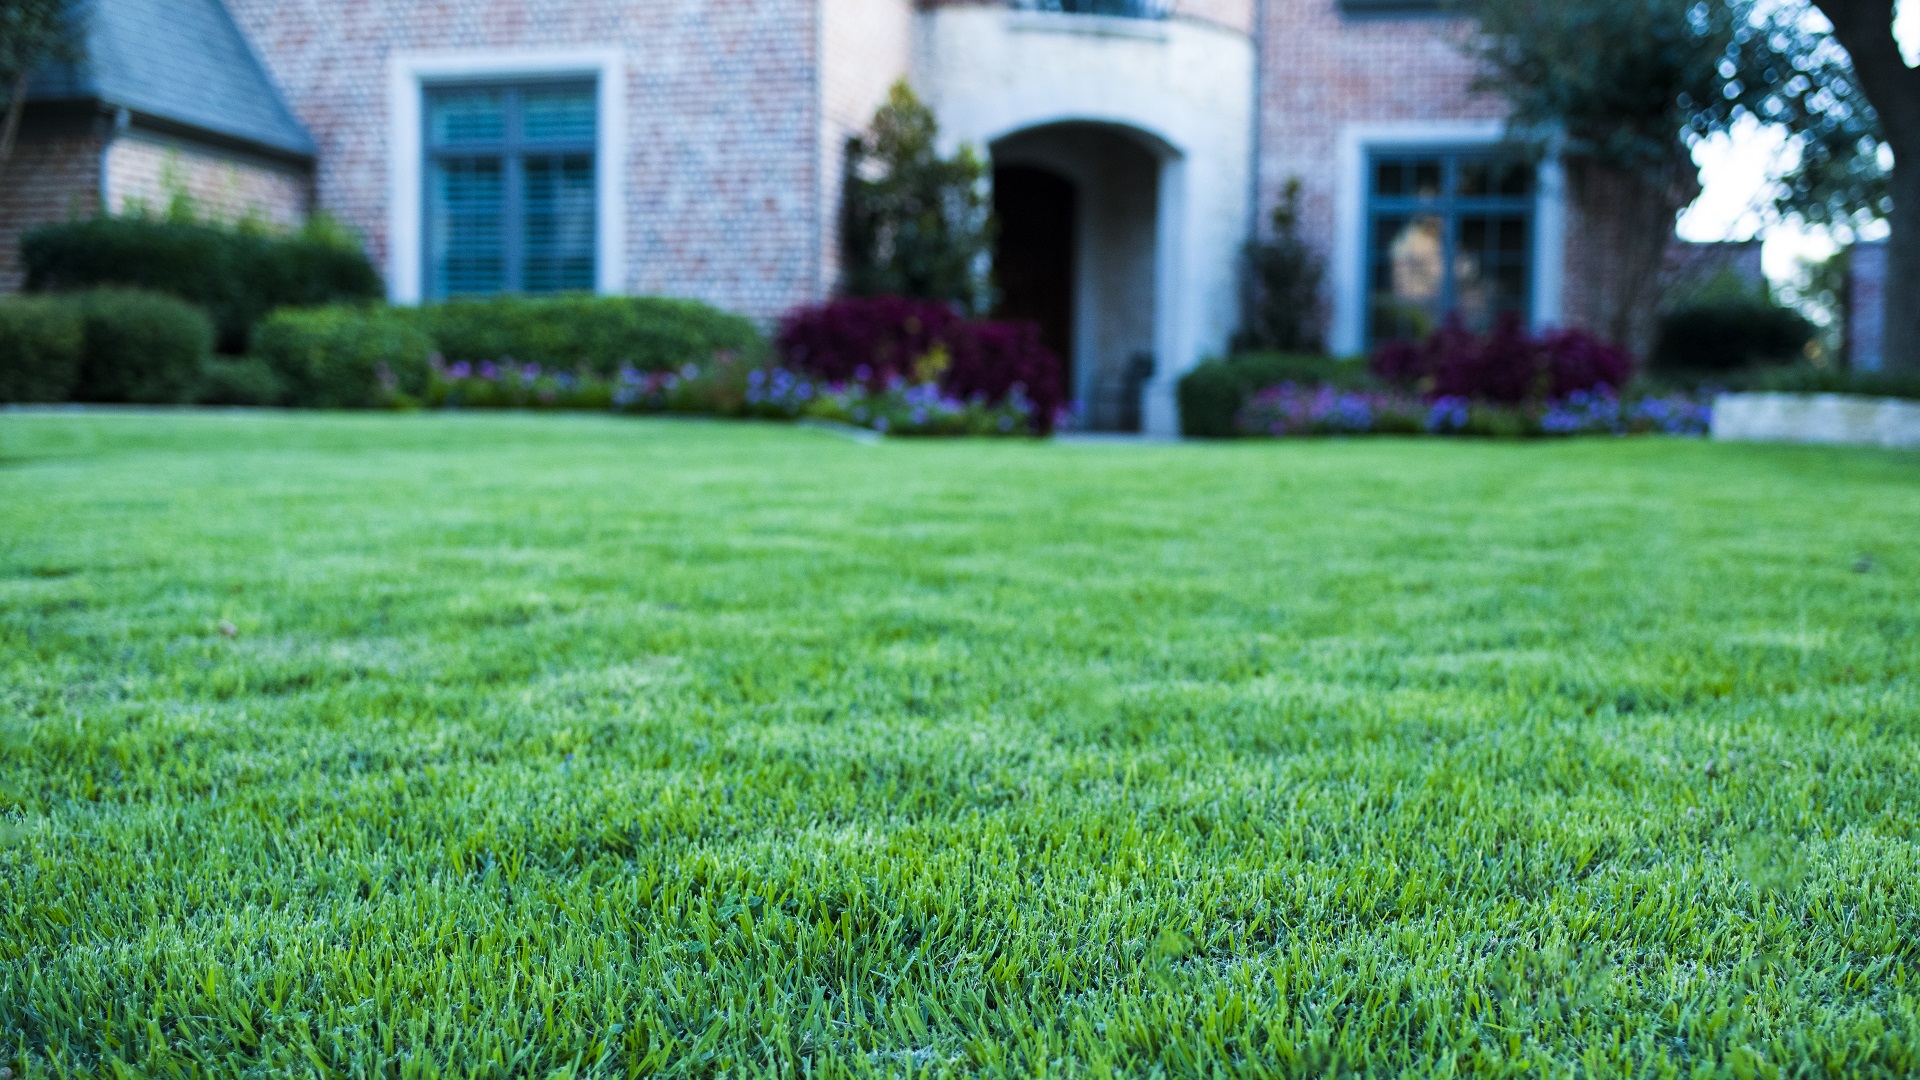 Will White Vinegar Kill Grass Along With Weeds?